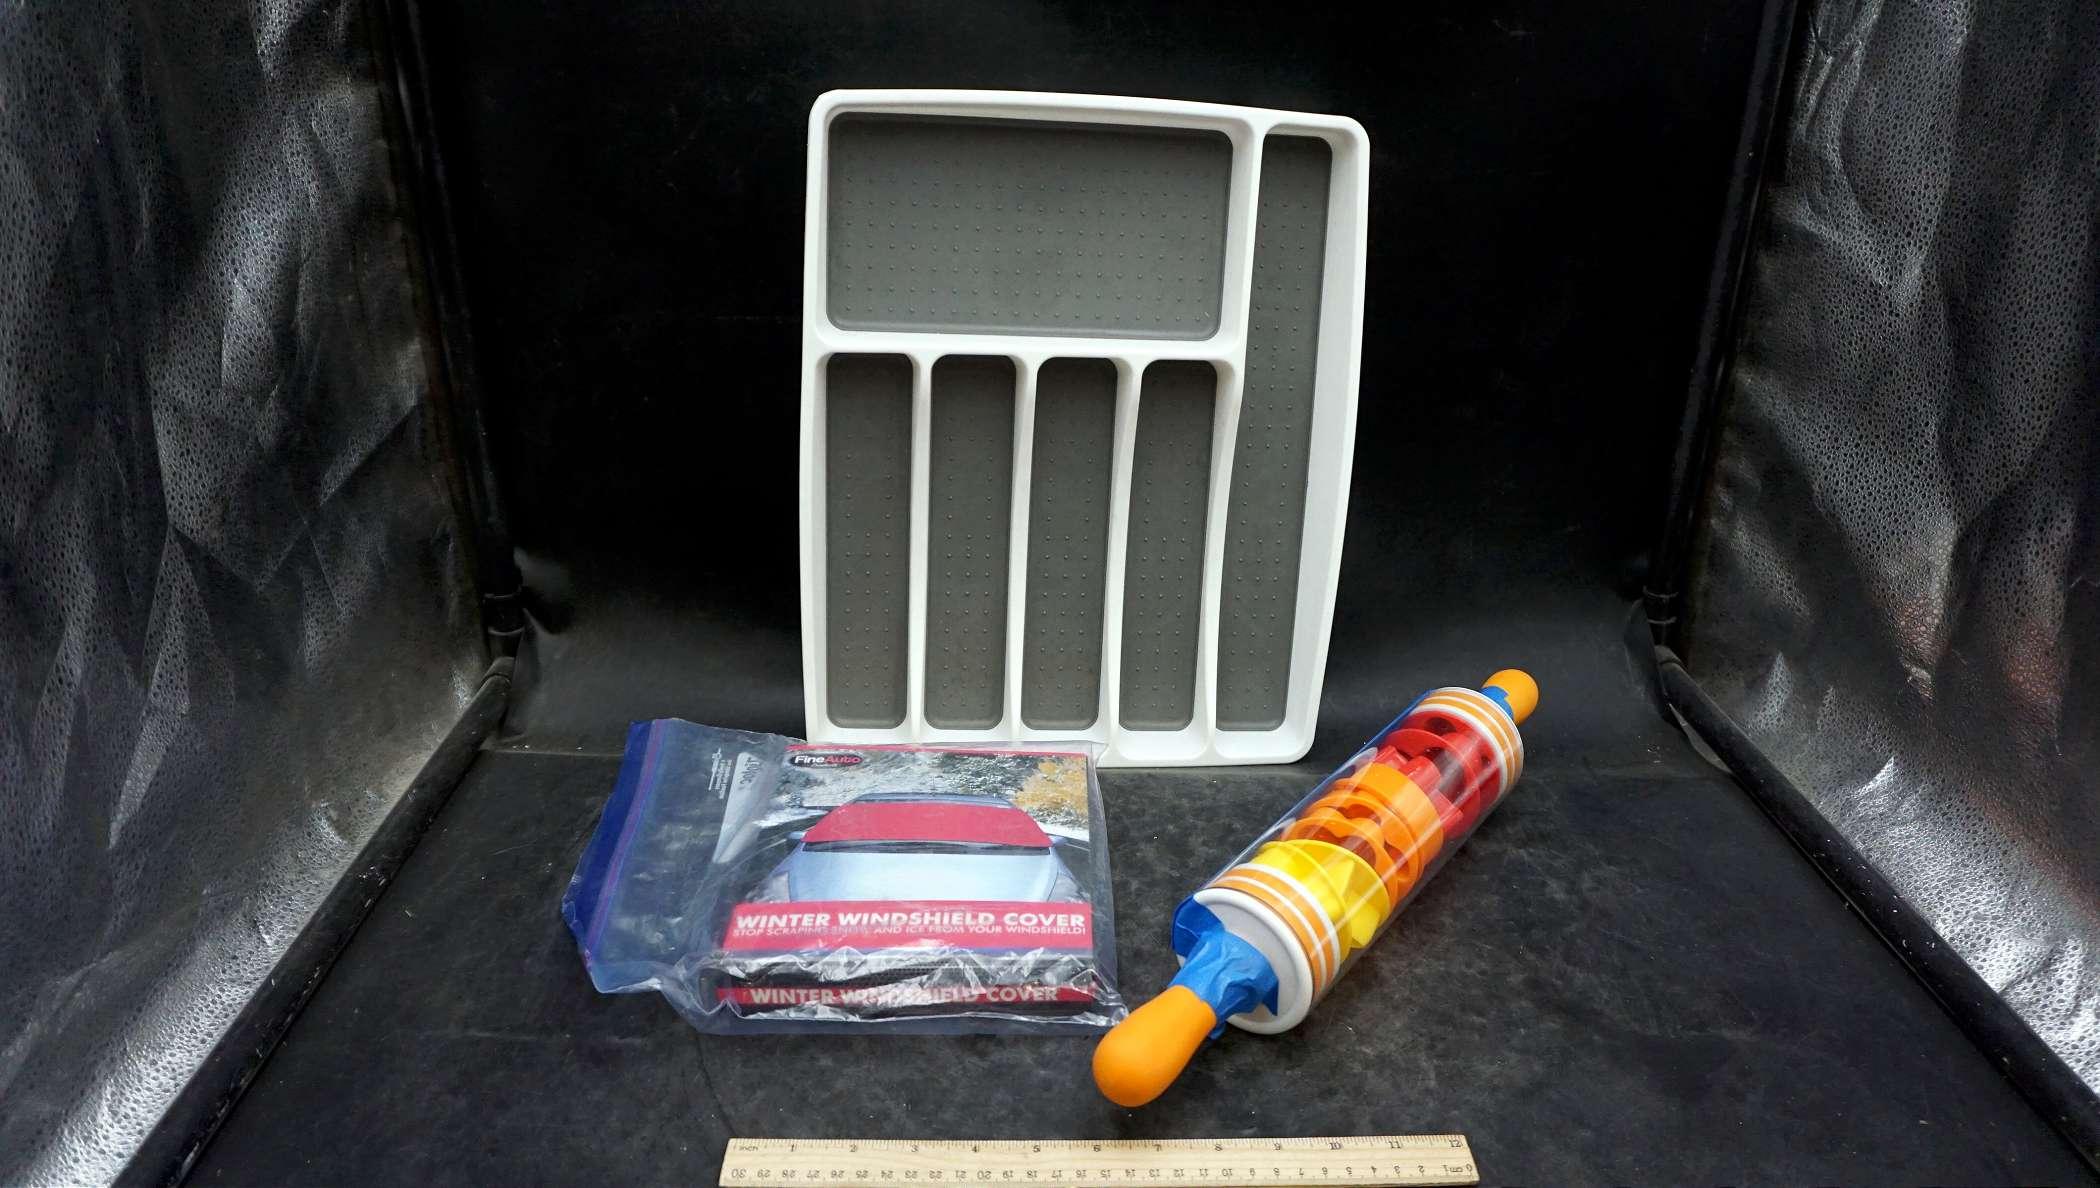 Drawer Organizer, Rolling Pin & Winter Windshield Cover